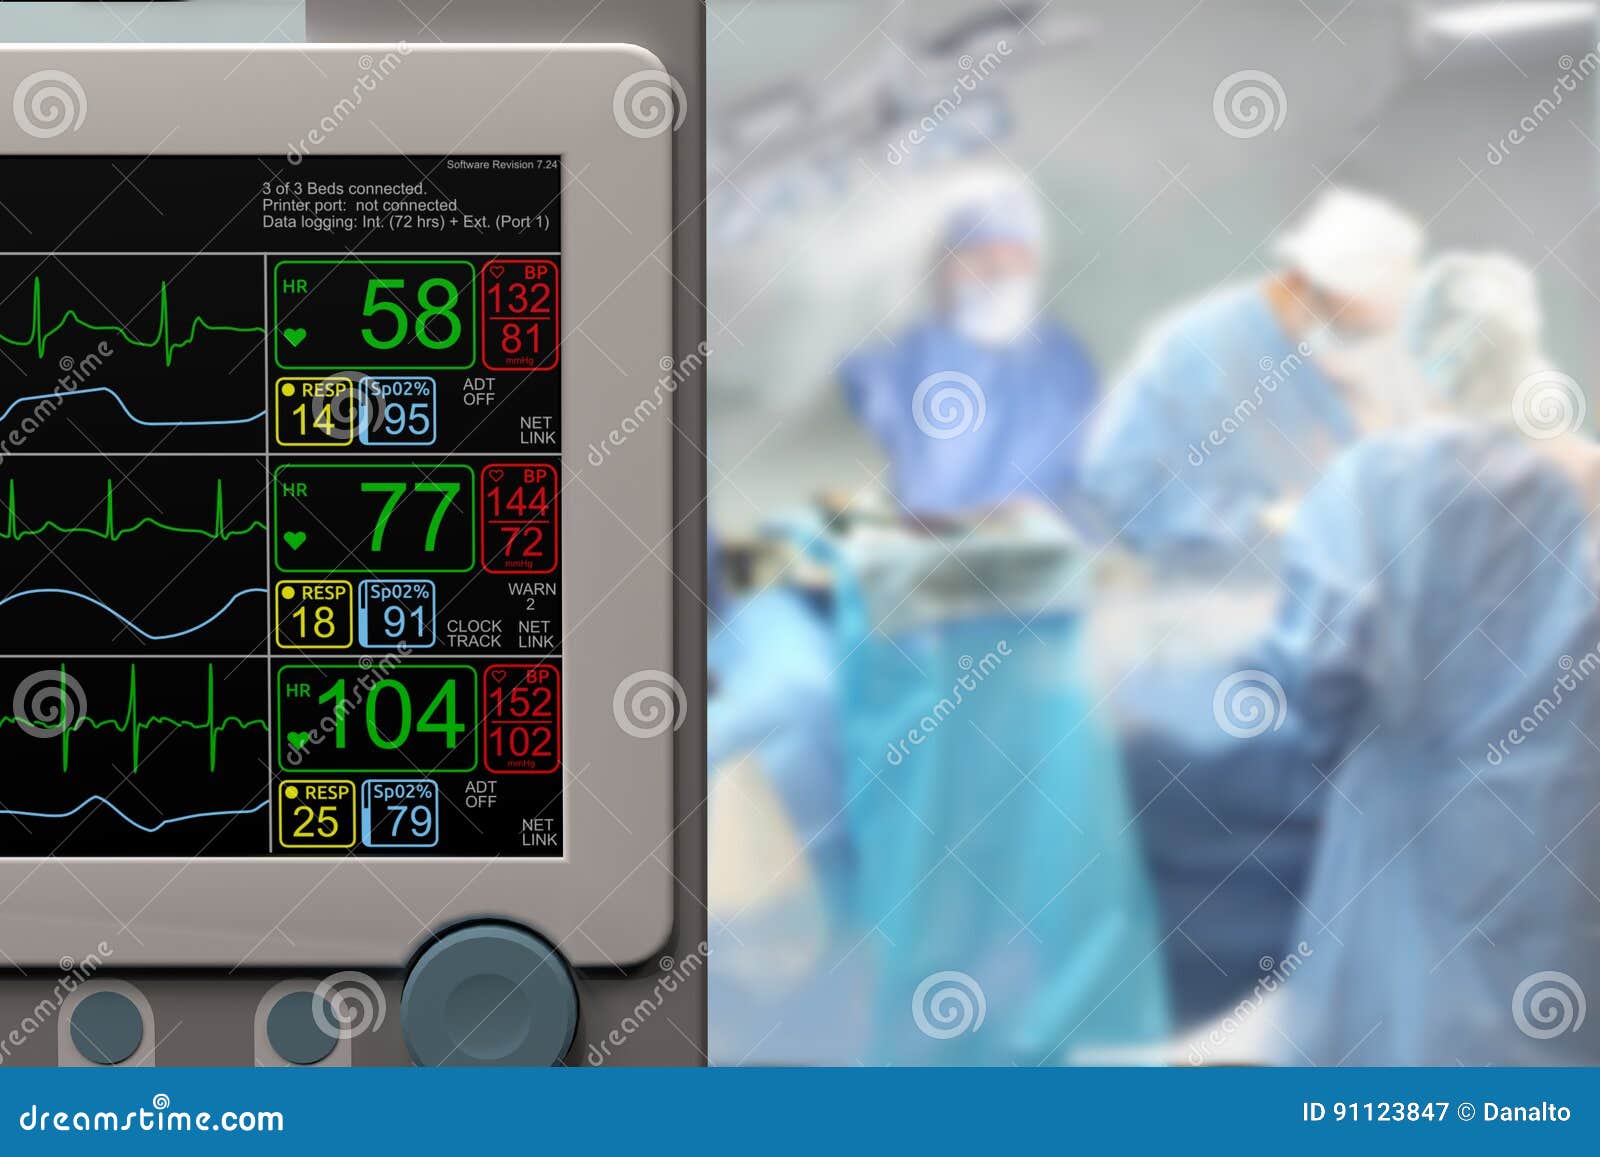 intensive care unit icu lcd monitor and ongoing surgery